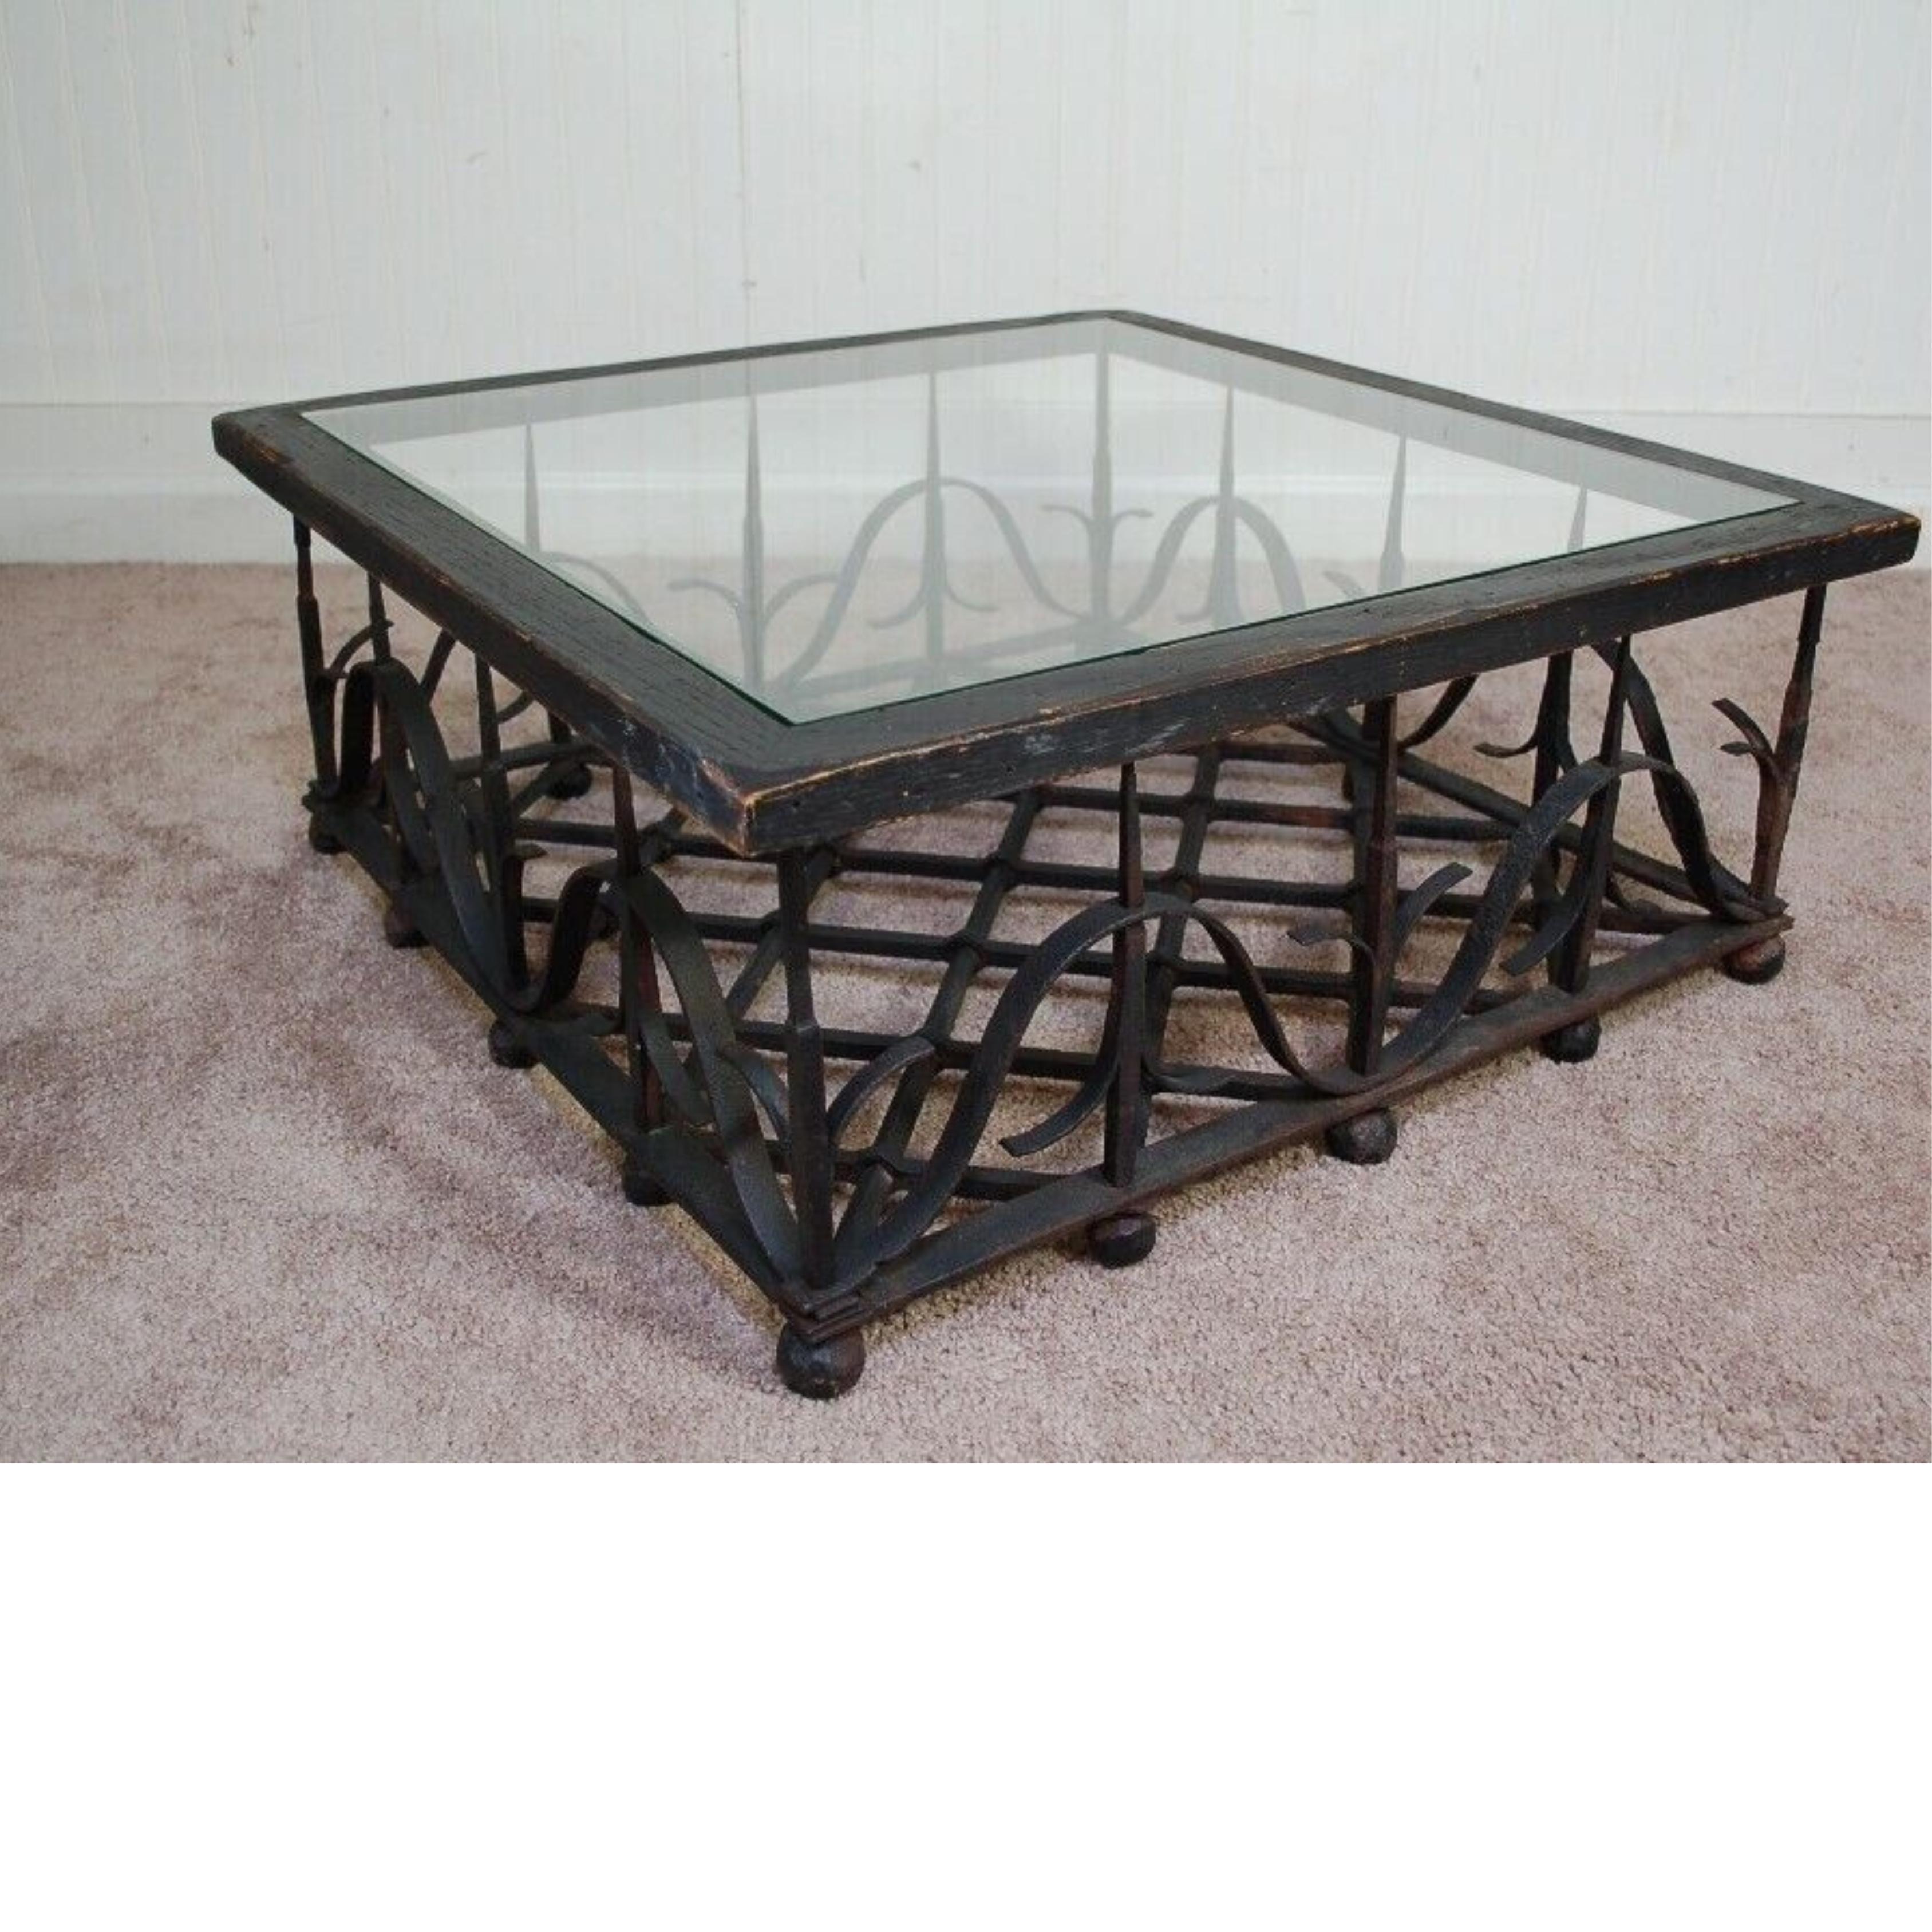 Antique Wrought Iron Mission Arts & Crafts Coffee Table in the style of Samuel Yellin. Item base features an intricate woven wrought iron pattern raised on ball form feet top with a wooden frame and inset glass. Circa 1900s. Measurements: 10.5